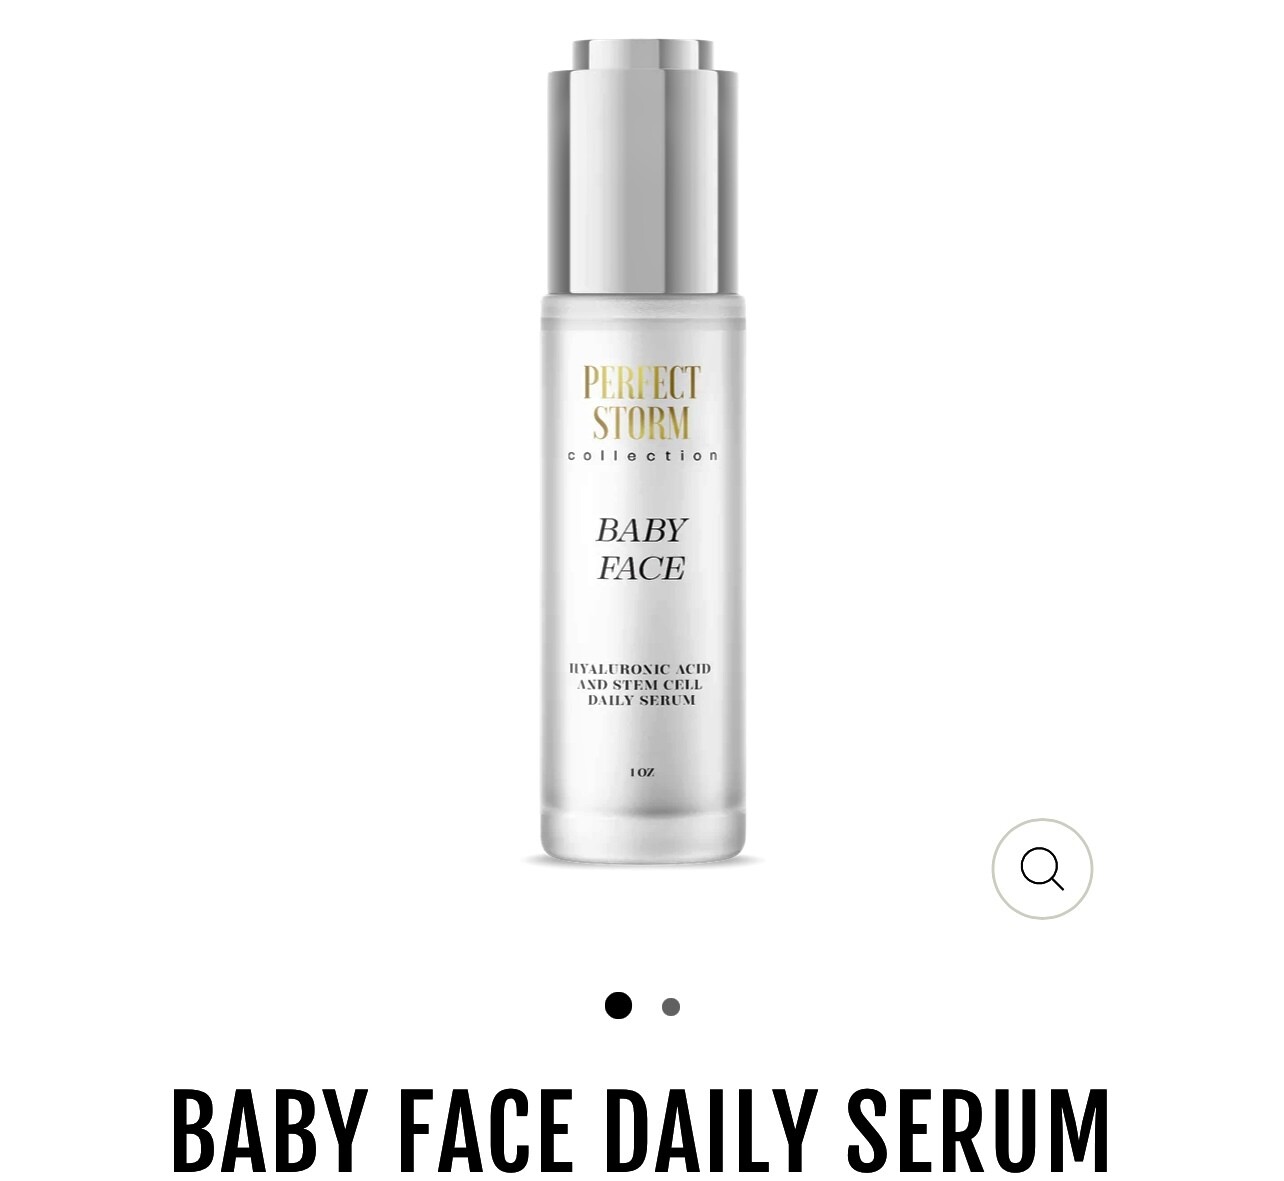 Baby face daily serum